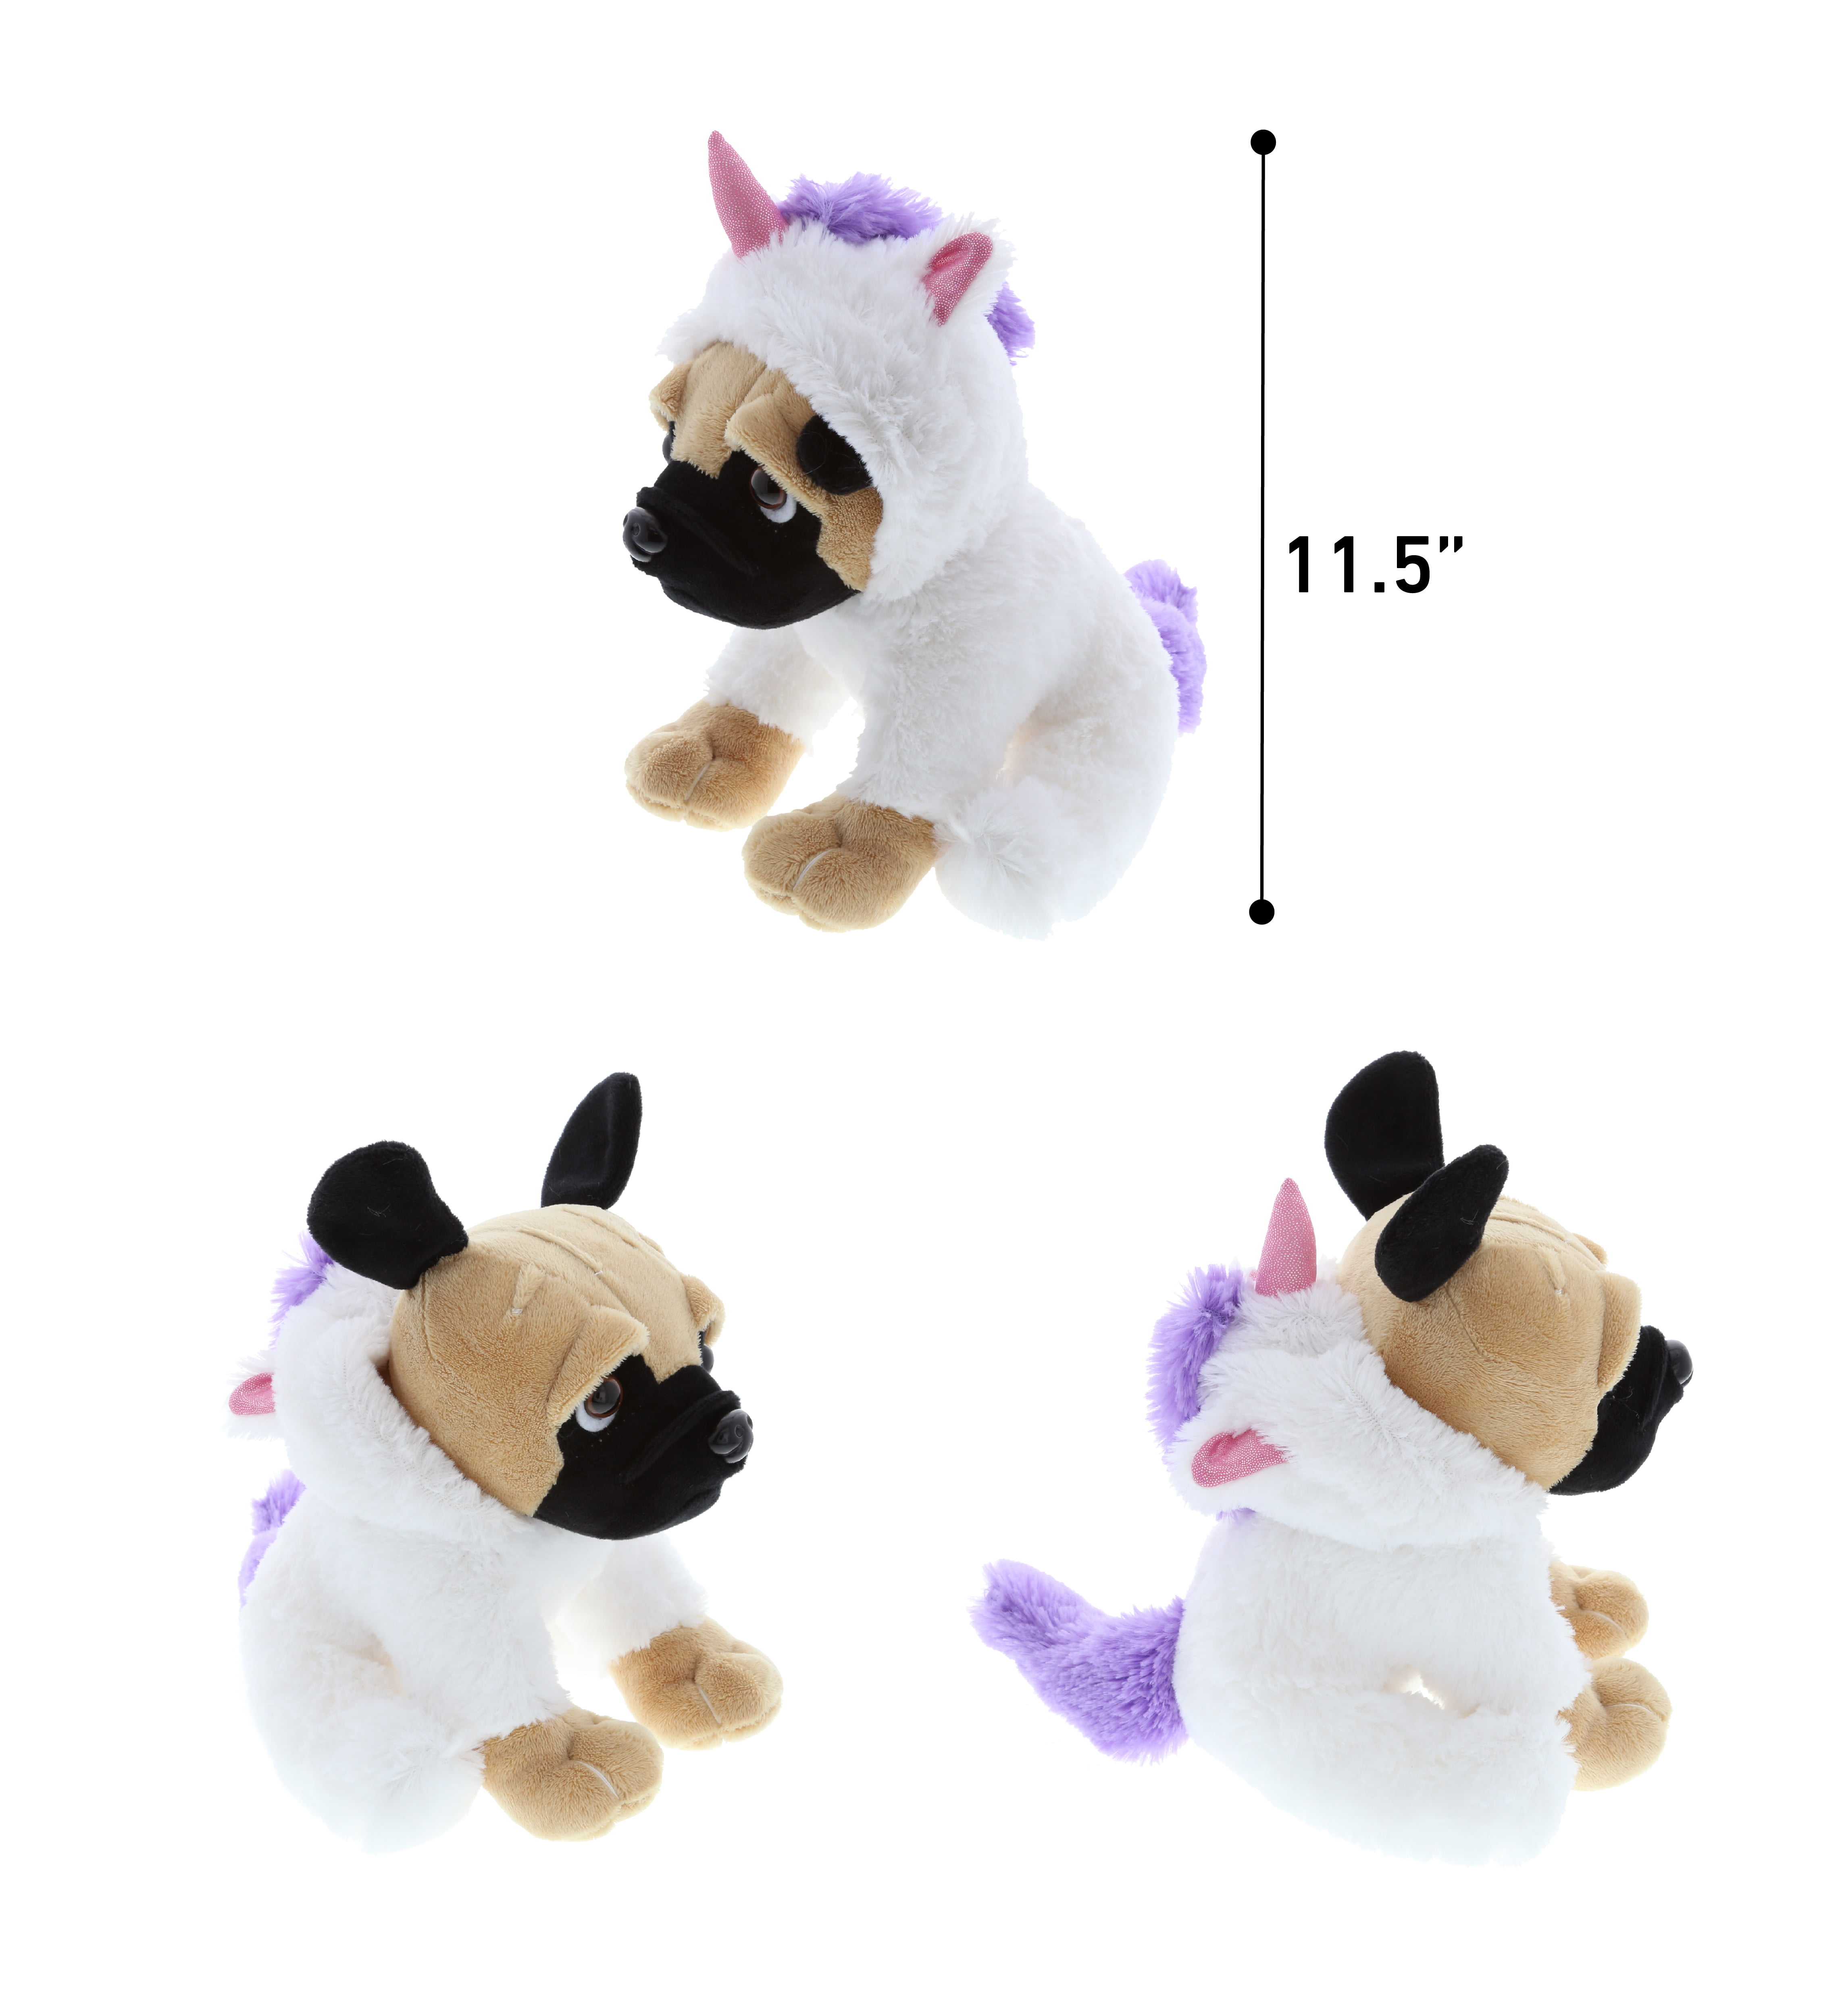 20cm Cuddly Toy Plush Pug In Unicorn Costume Outfit Pink Hot Pink Or Purple 